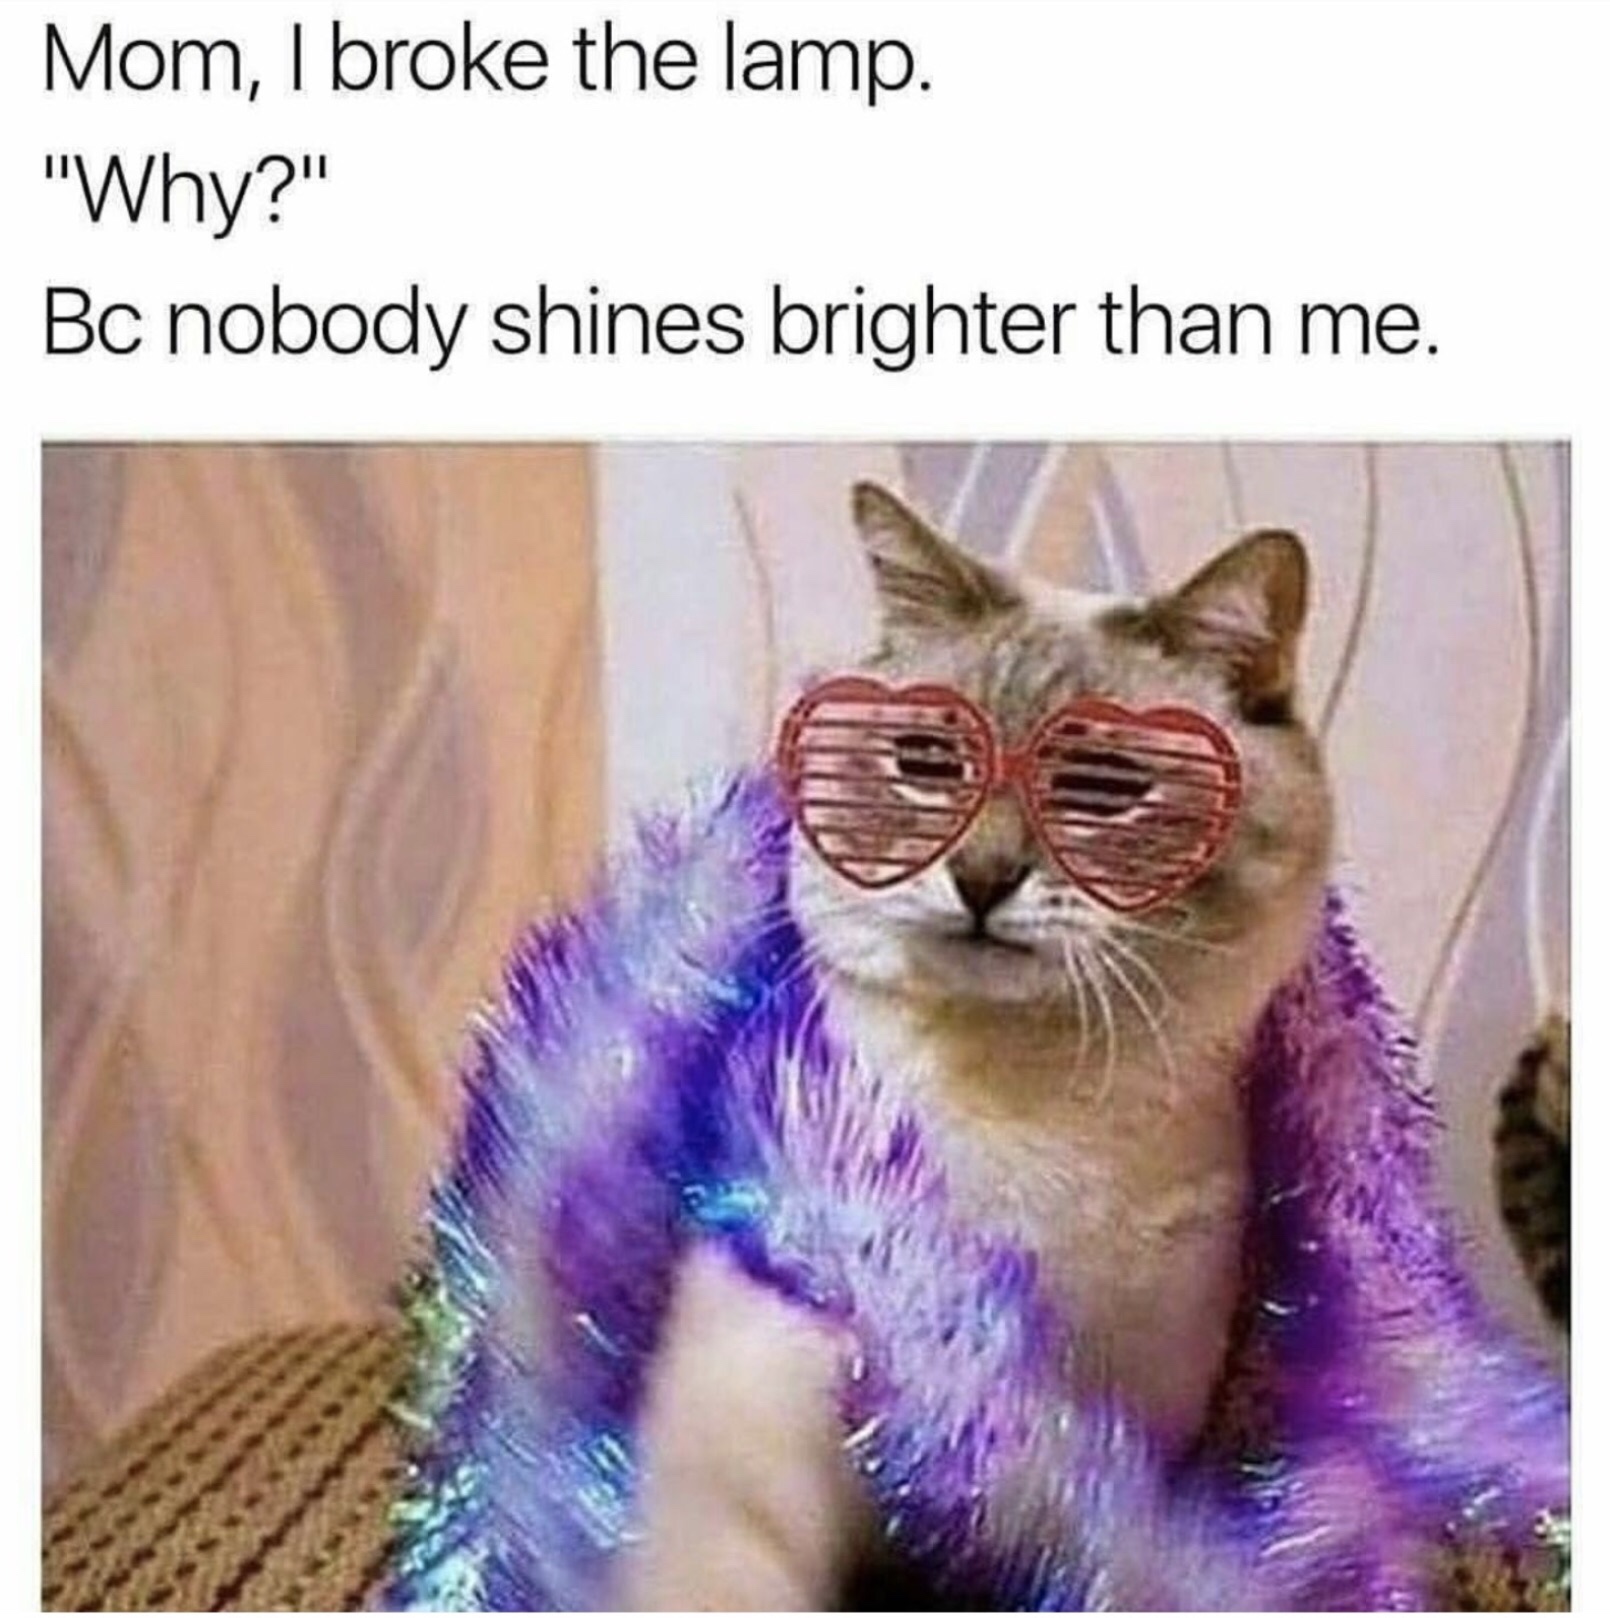 memes - no one shines brighter than me cat meme - Mom, I broke the lamp. "Why?" Bc nobody shines brighter than me.